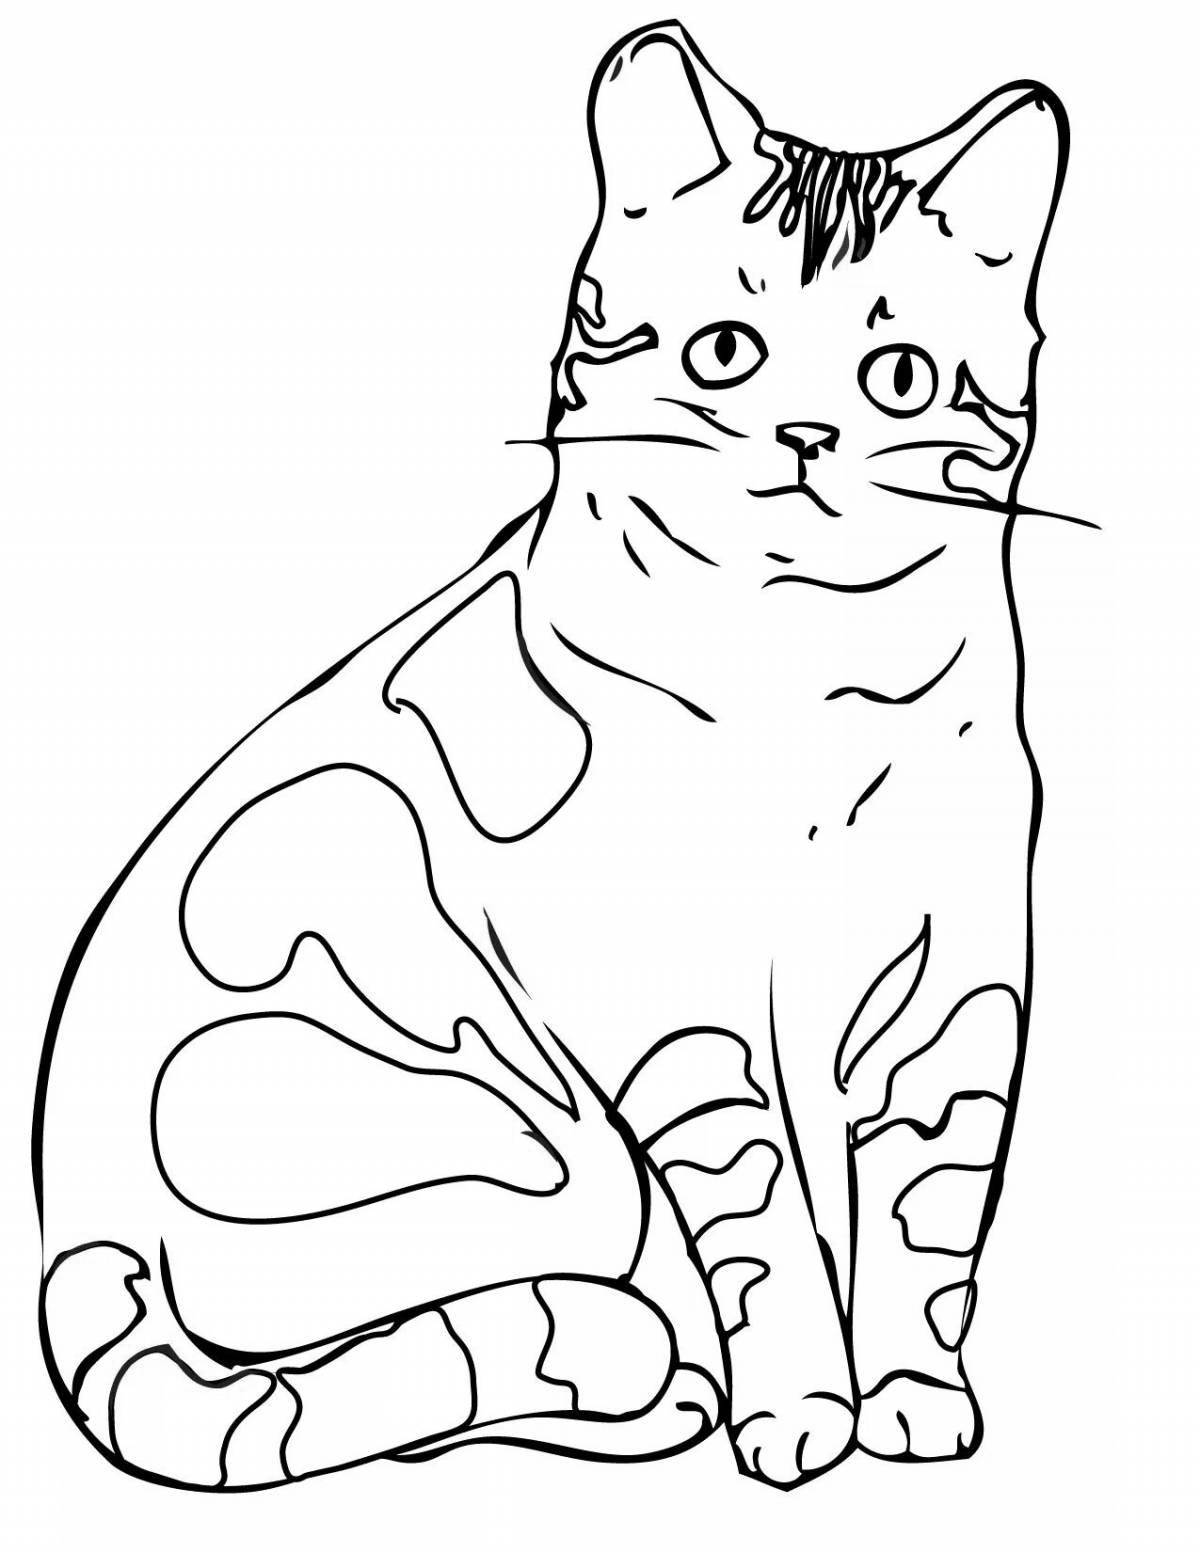 Bw cat coloring page content